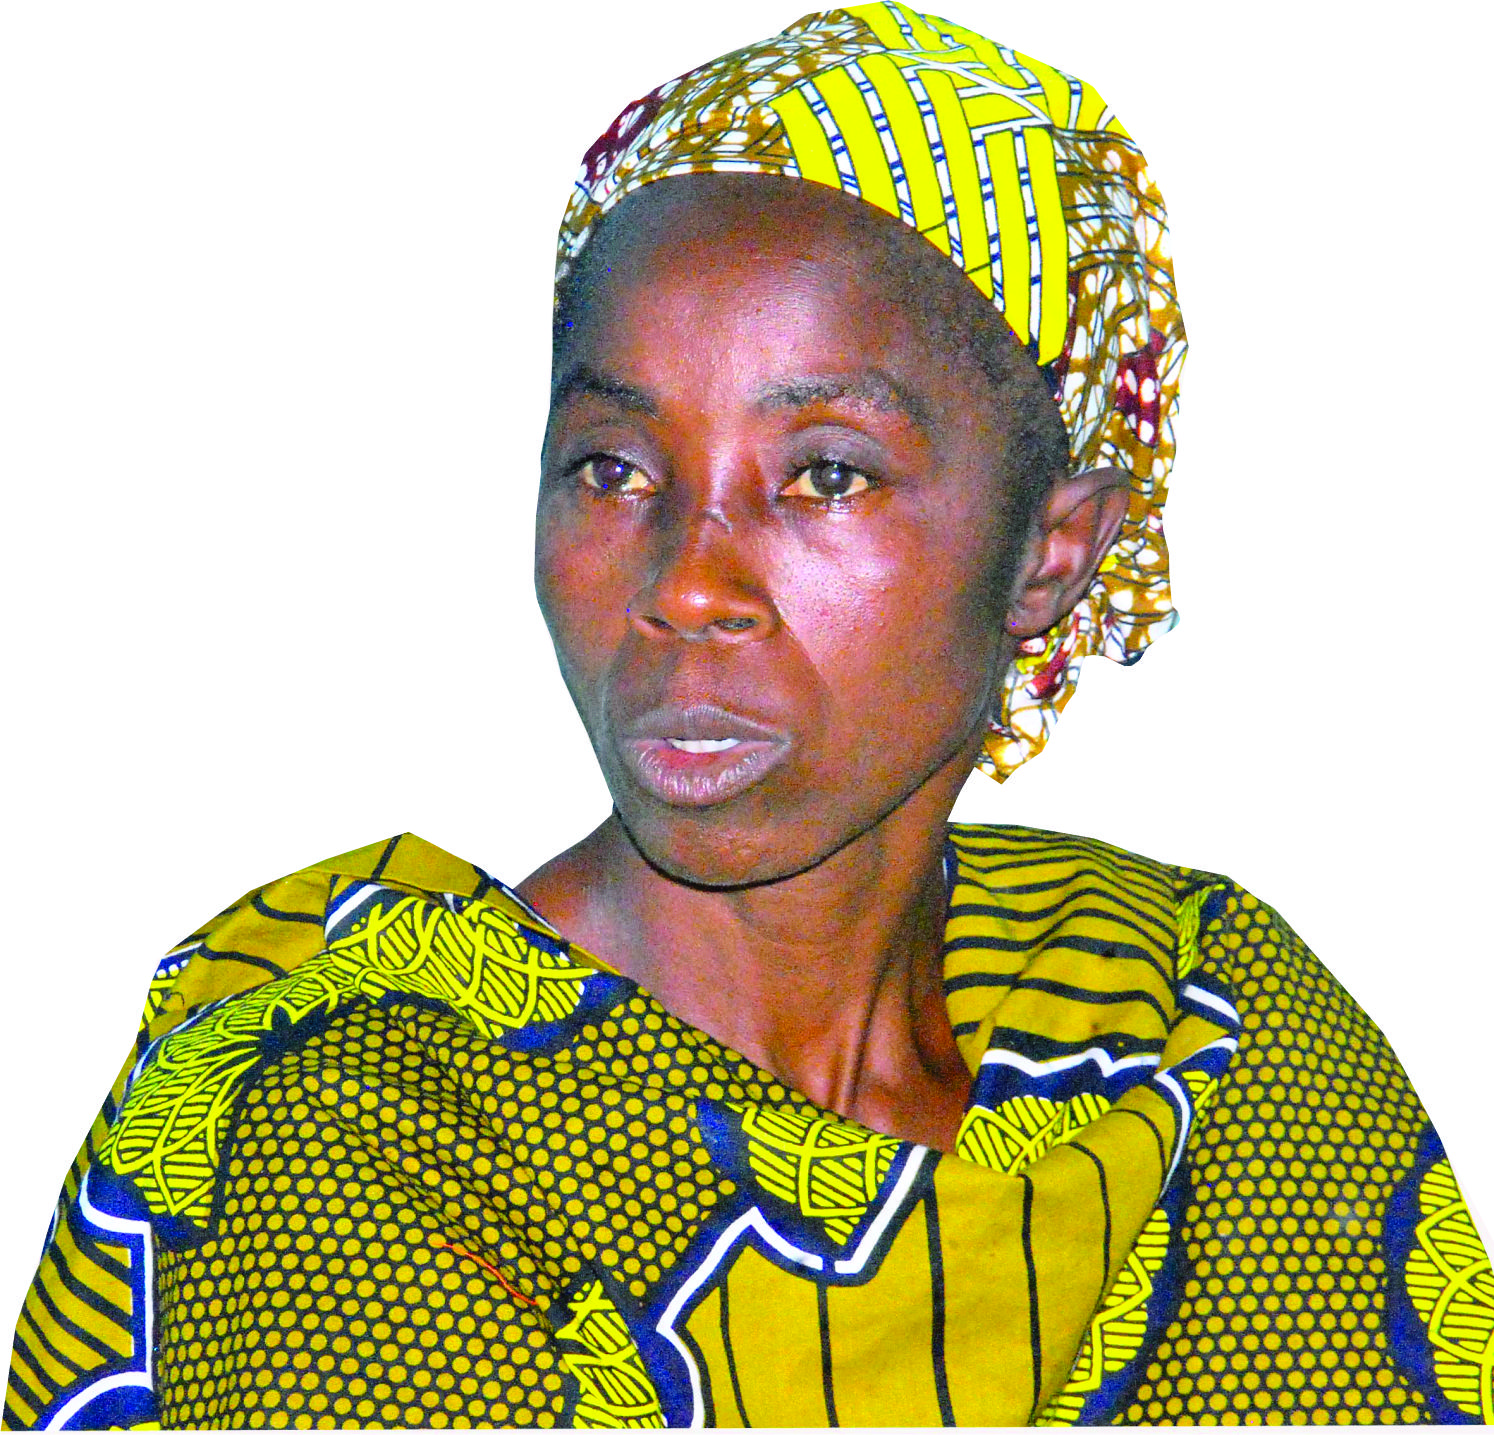 Ayomide Was Our Beacon Of Hope – Mother Of Fashion Designer Killed By Cop